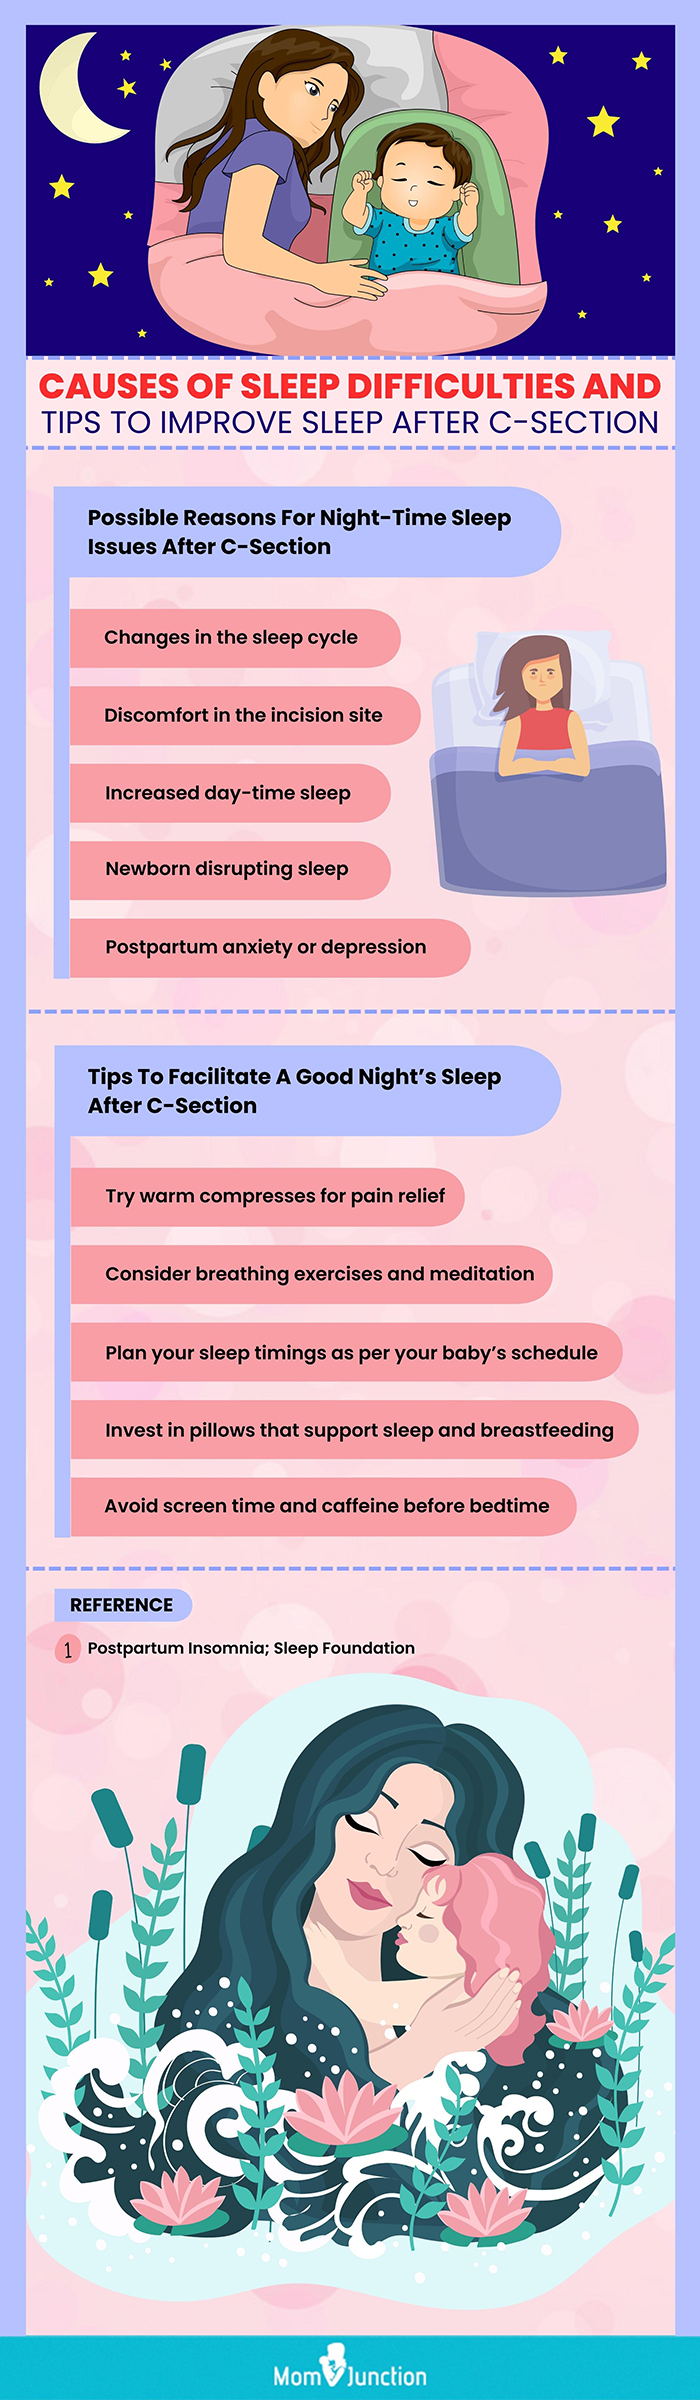 tips to improve sleep after c-section delivery (infographic)